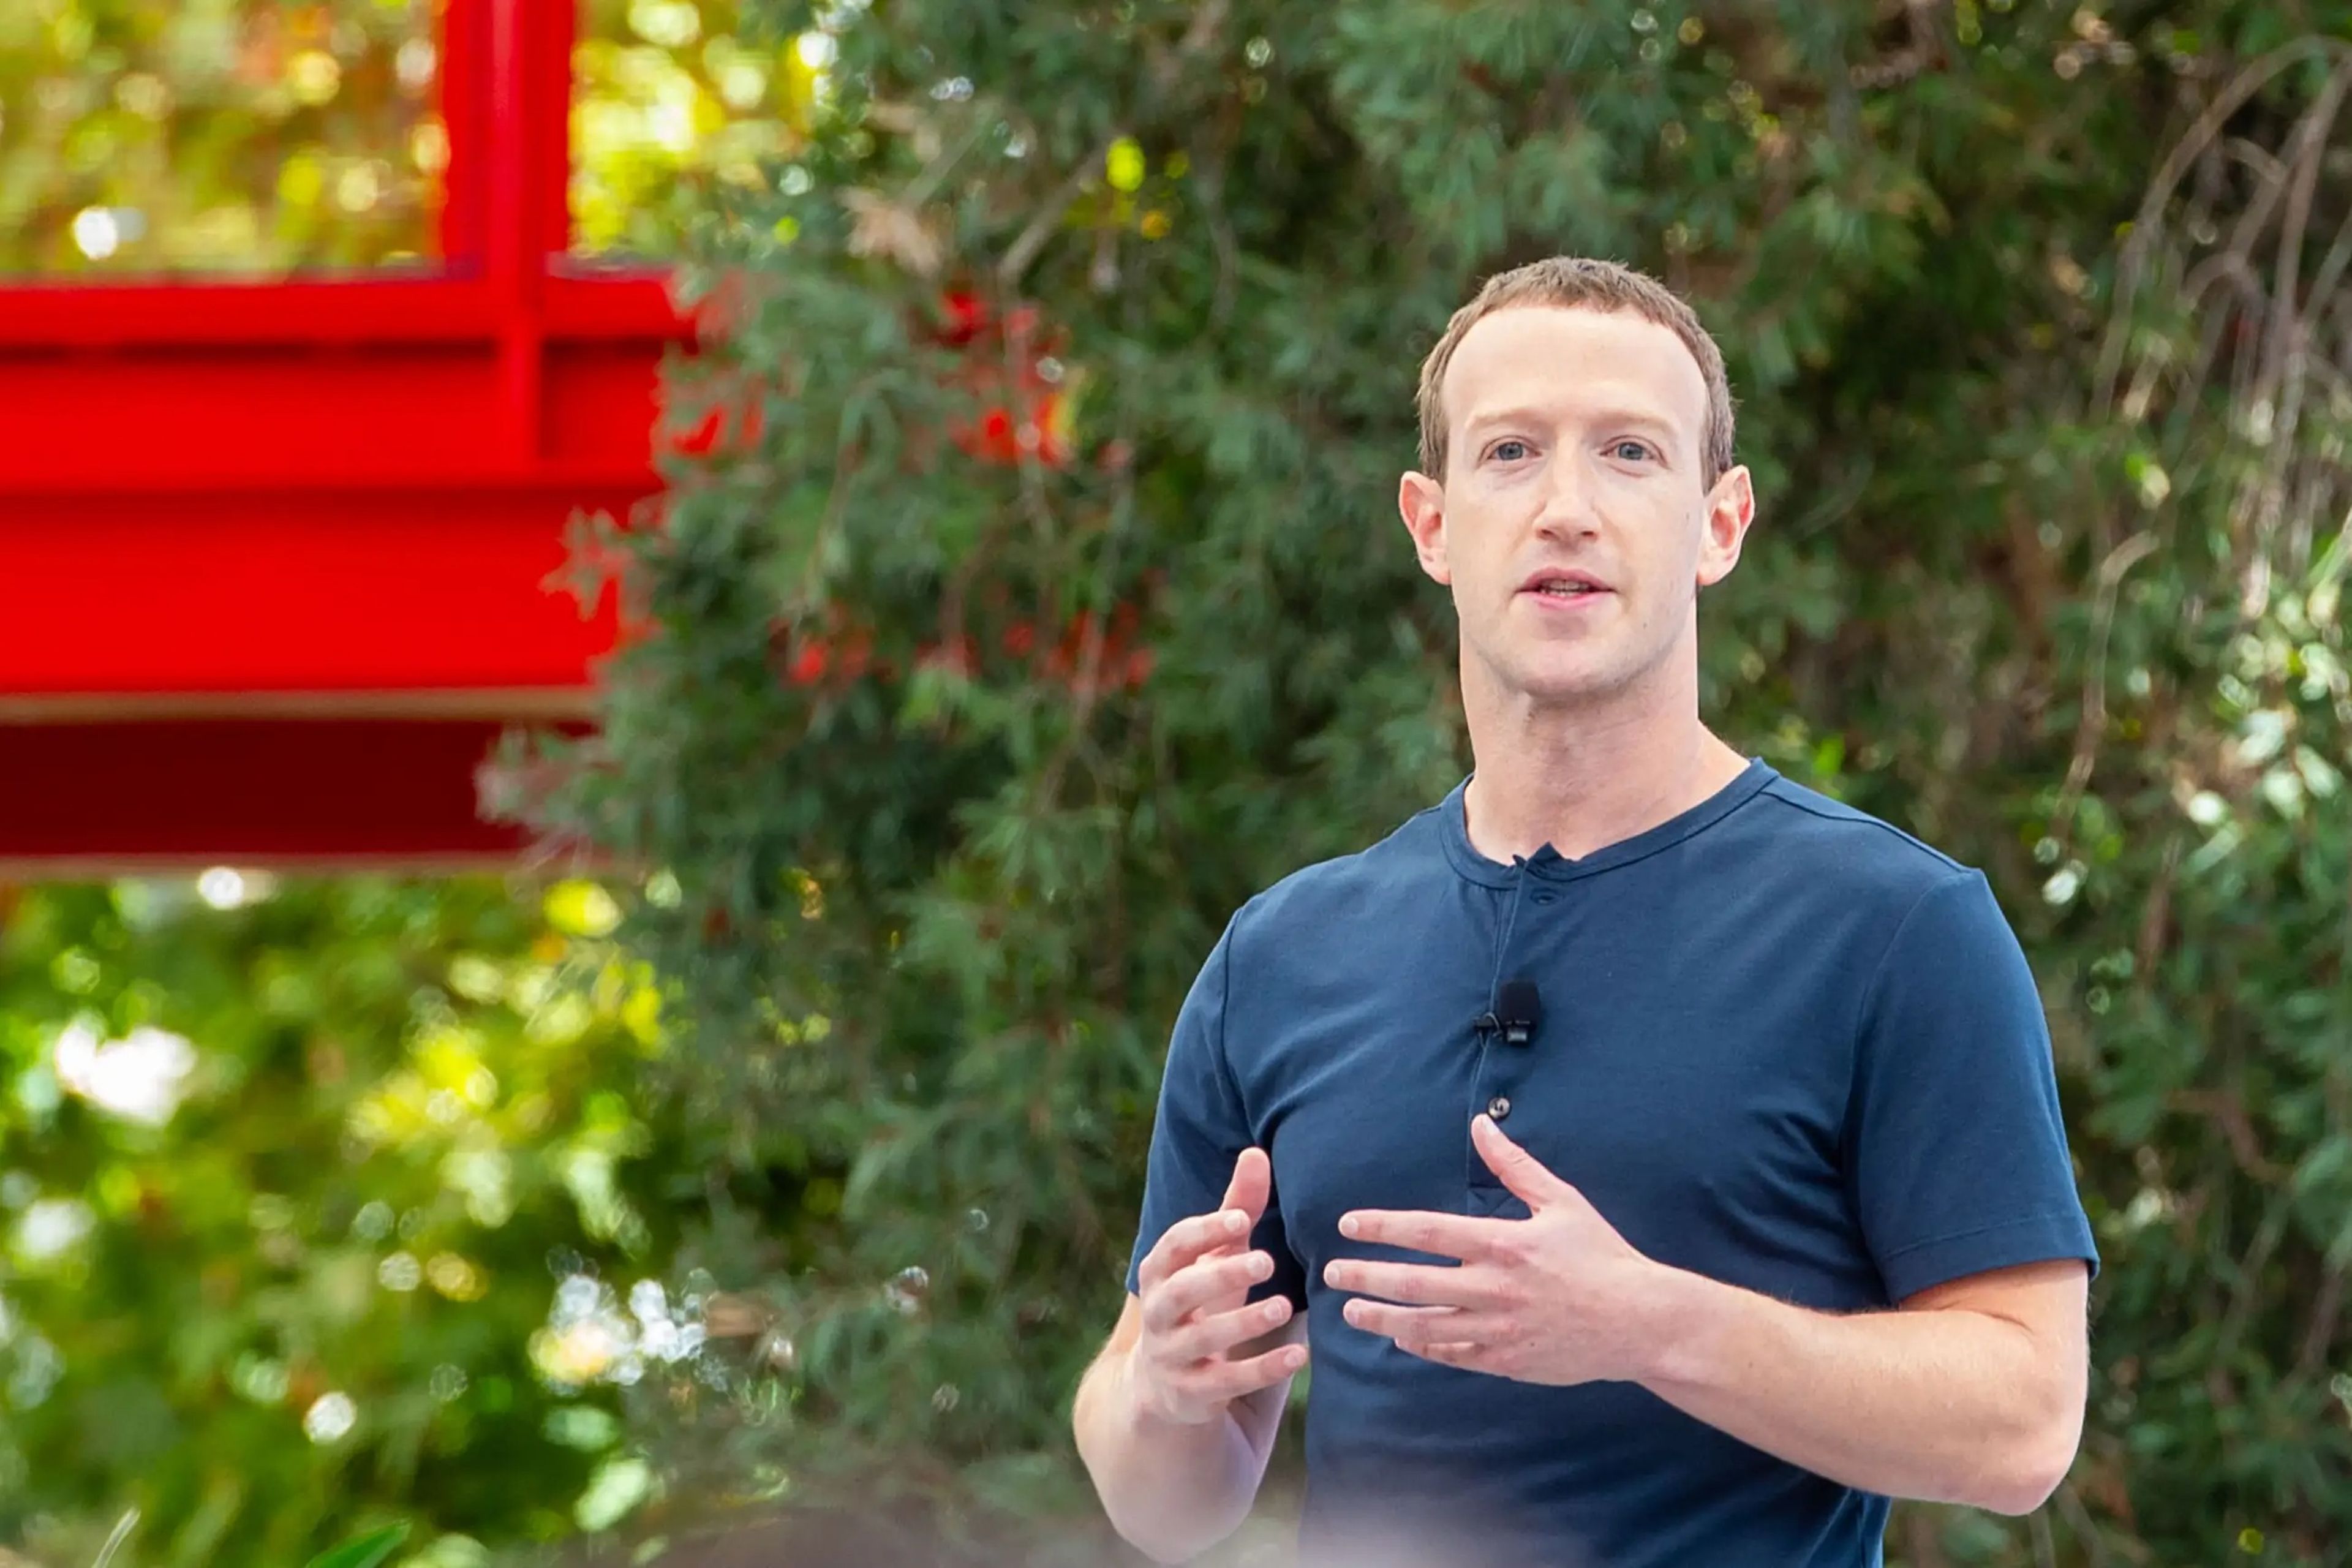 The founder and head of Facebook's Meta Group, Mark Zuckerberg, presents new devices and AI at a conference.